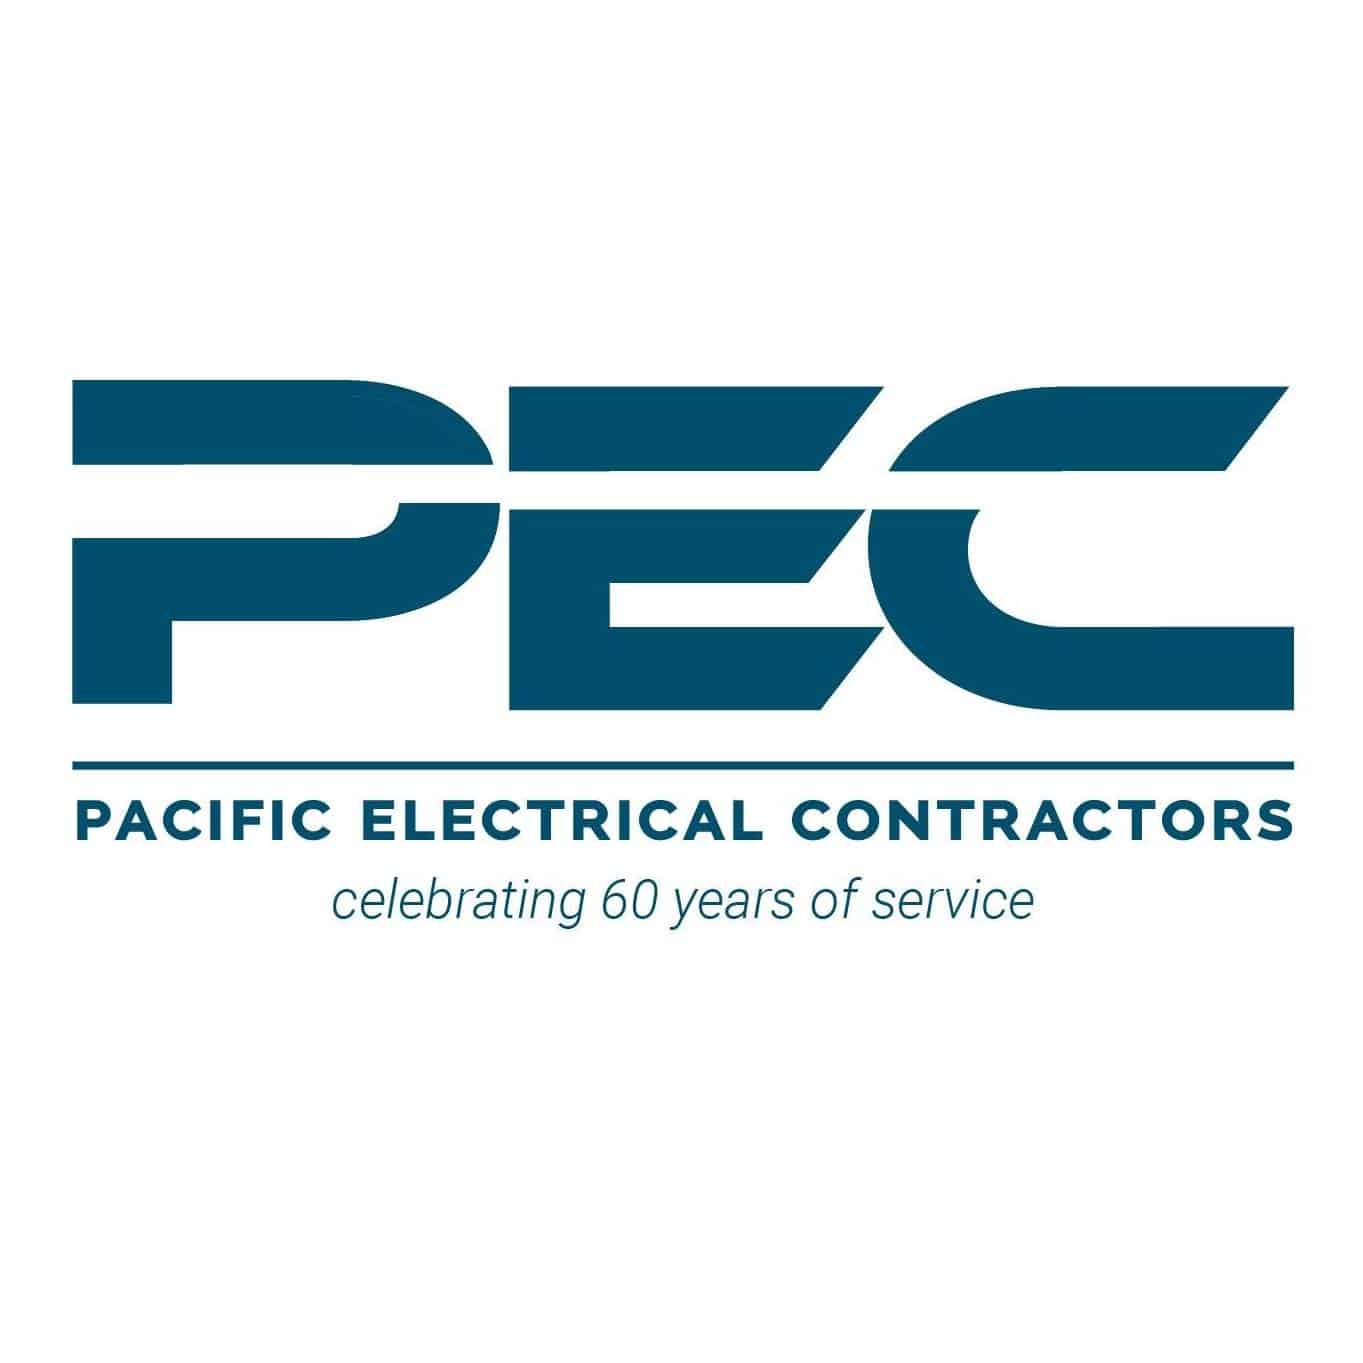 Pacific Electrical